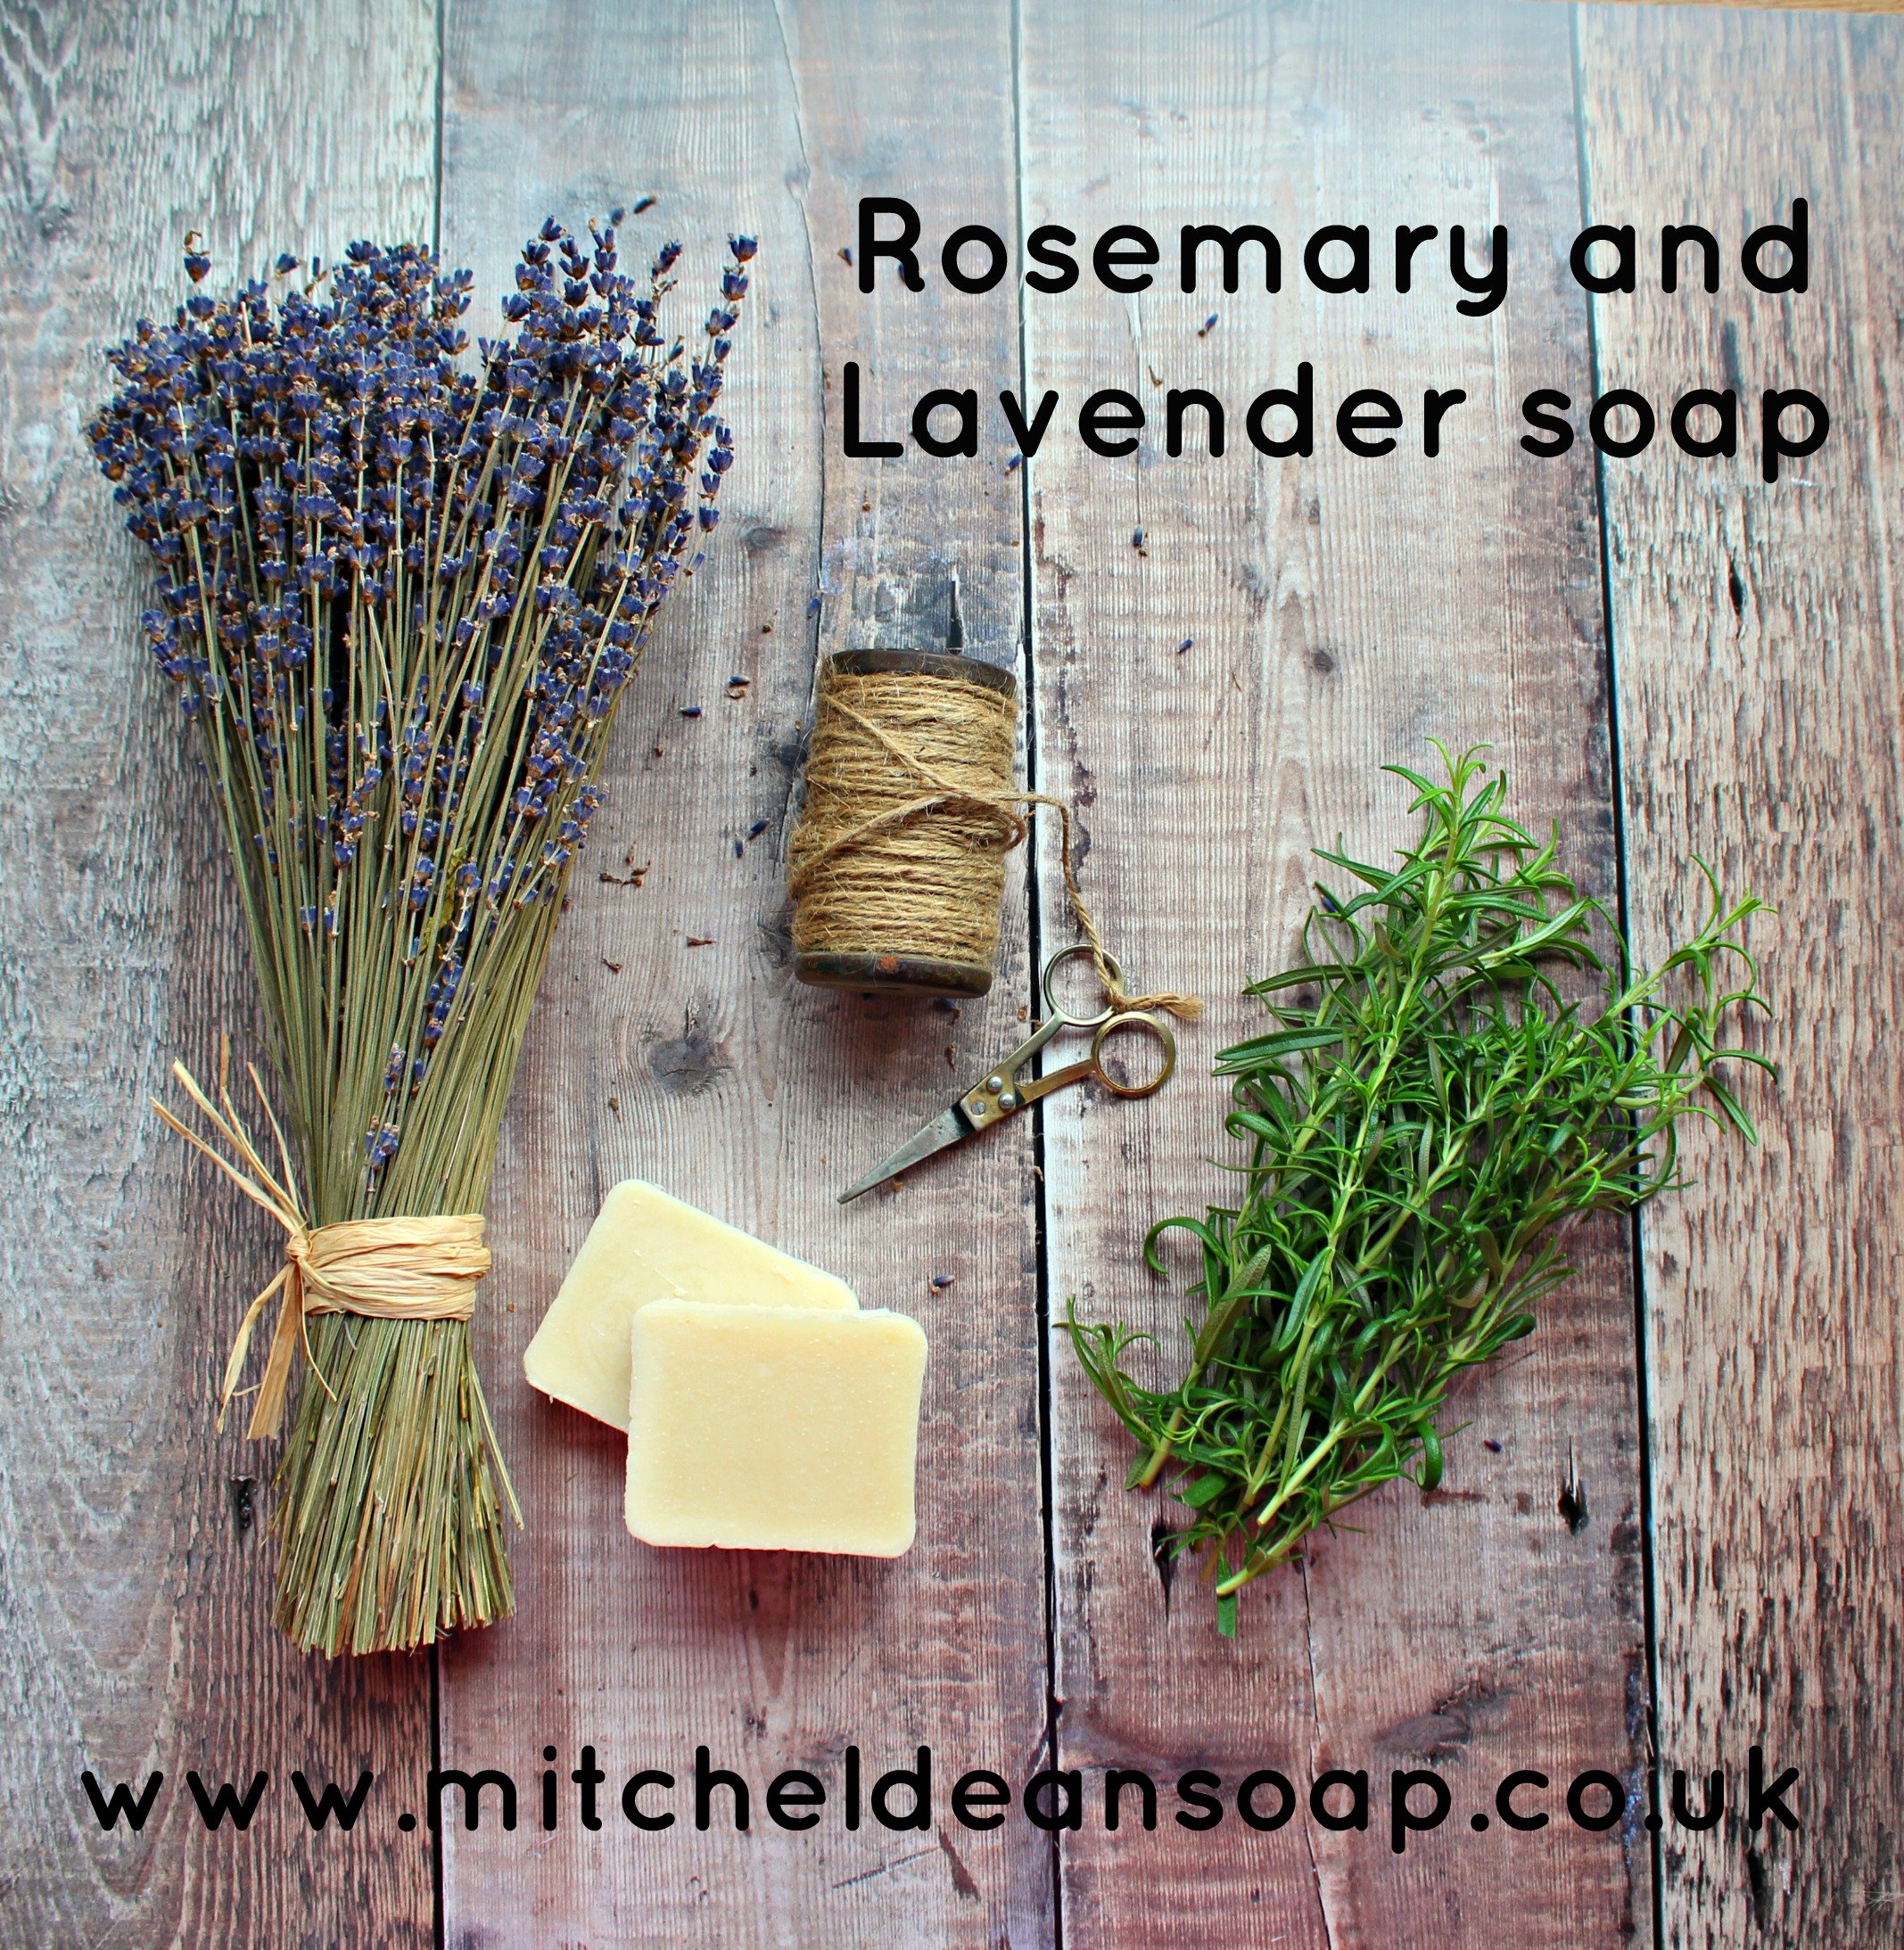 Mitcheldean Soap Rosemary-and-Lavender-Soap-.jpg